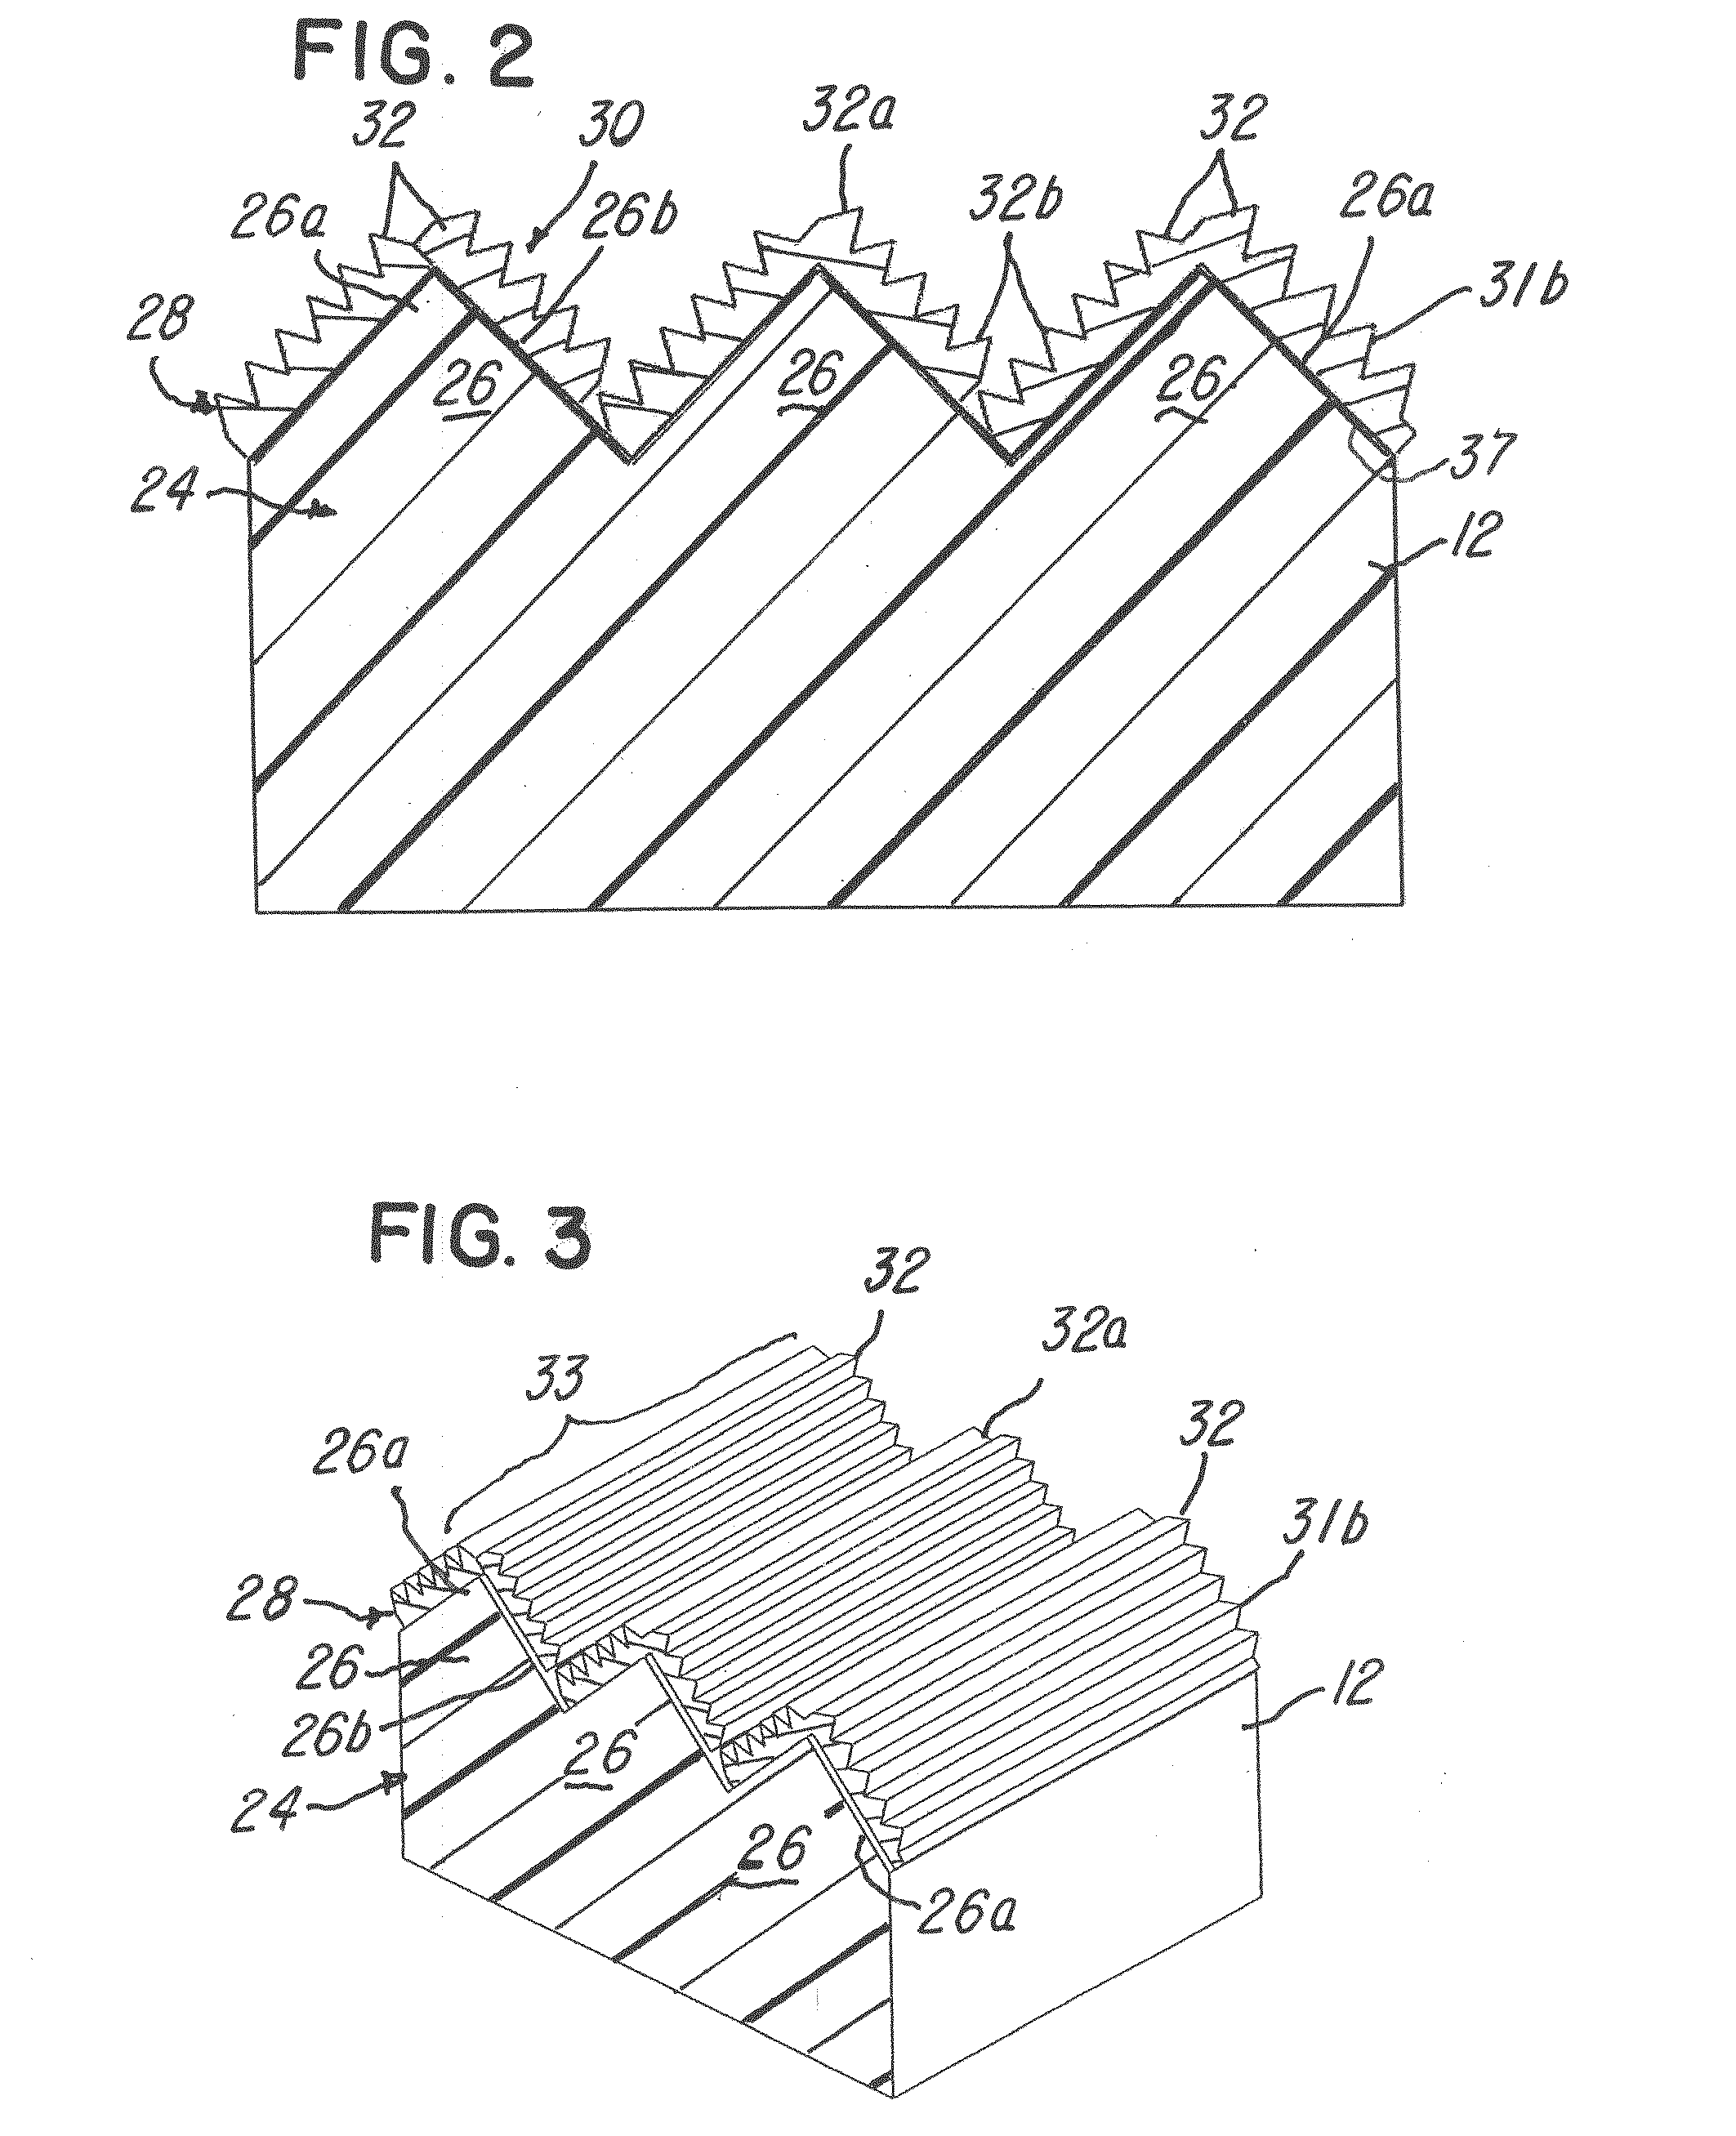 Composite orthopedic implant having a low friction material substrate with primary frictional features and secondary frictional features